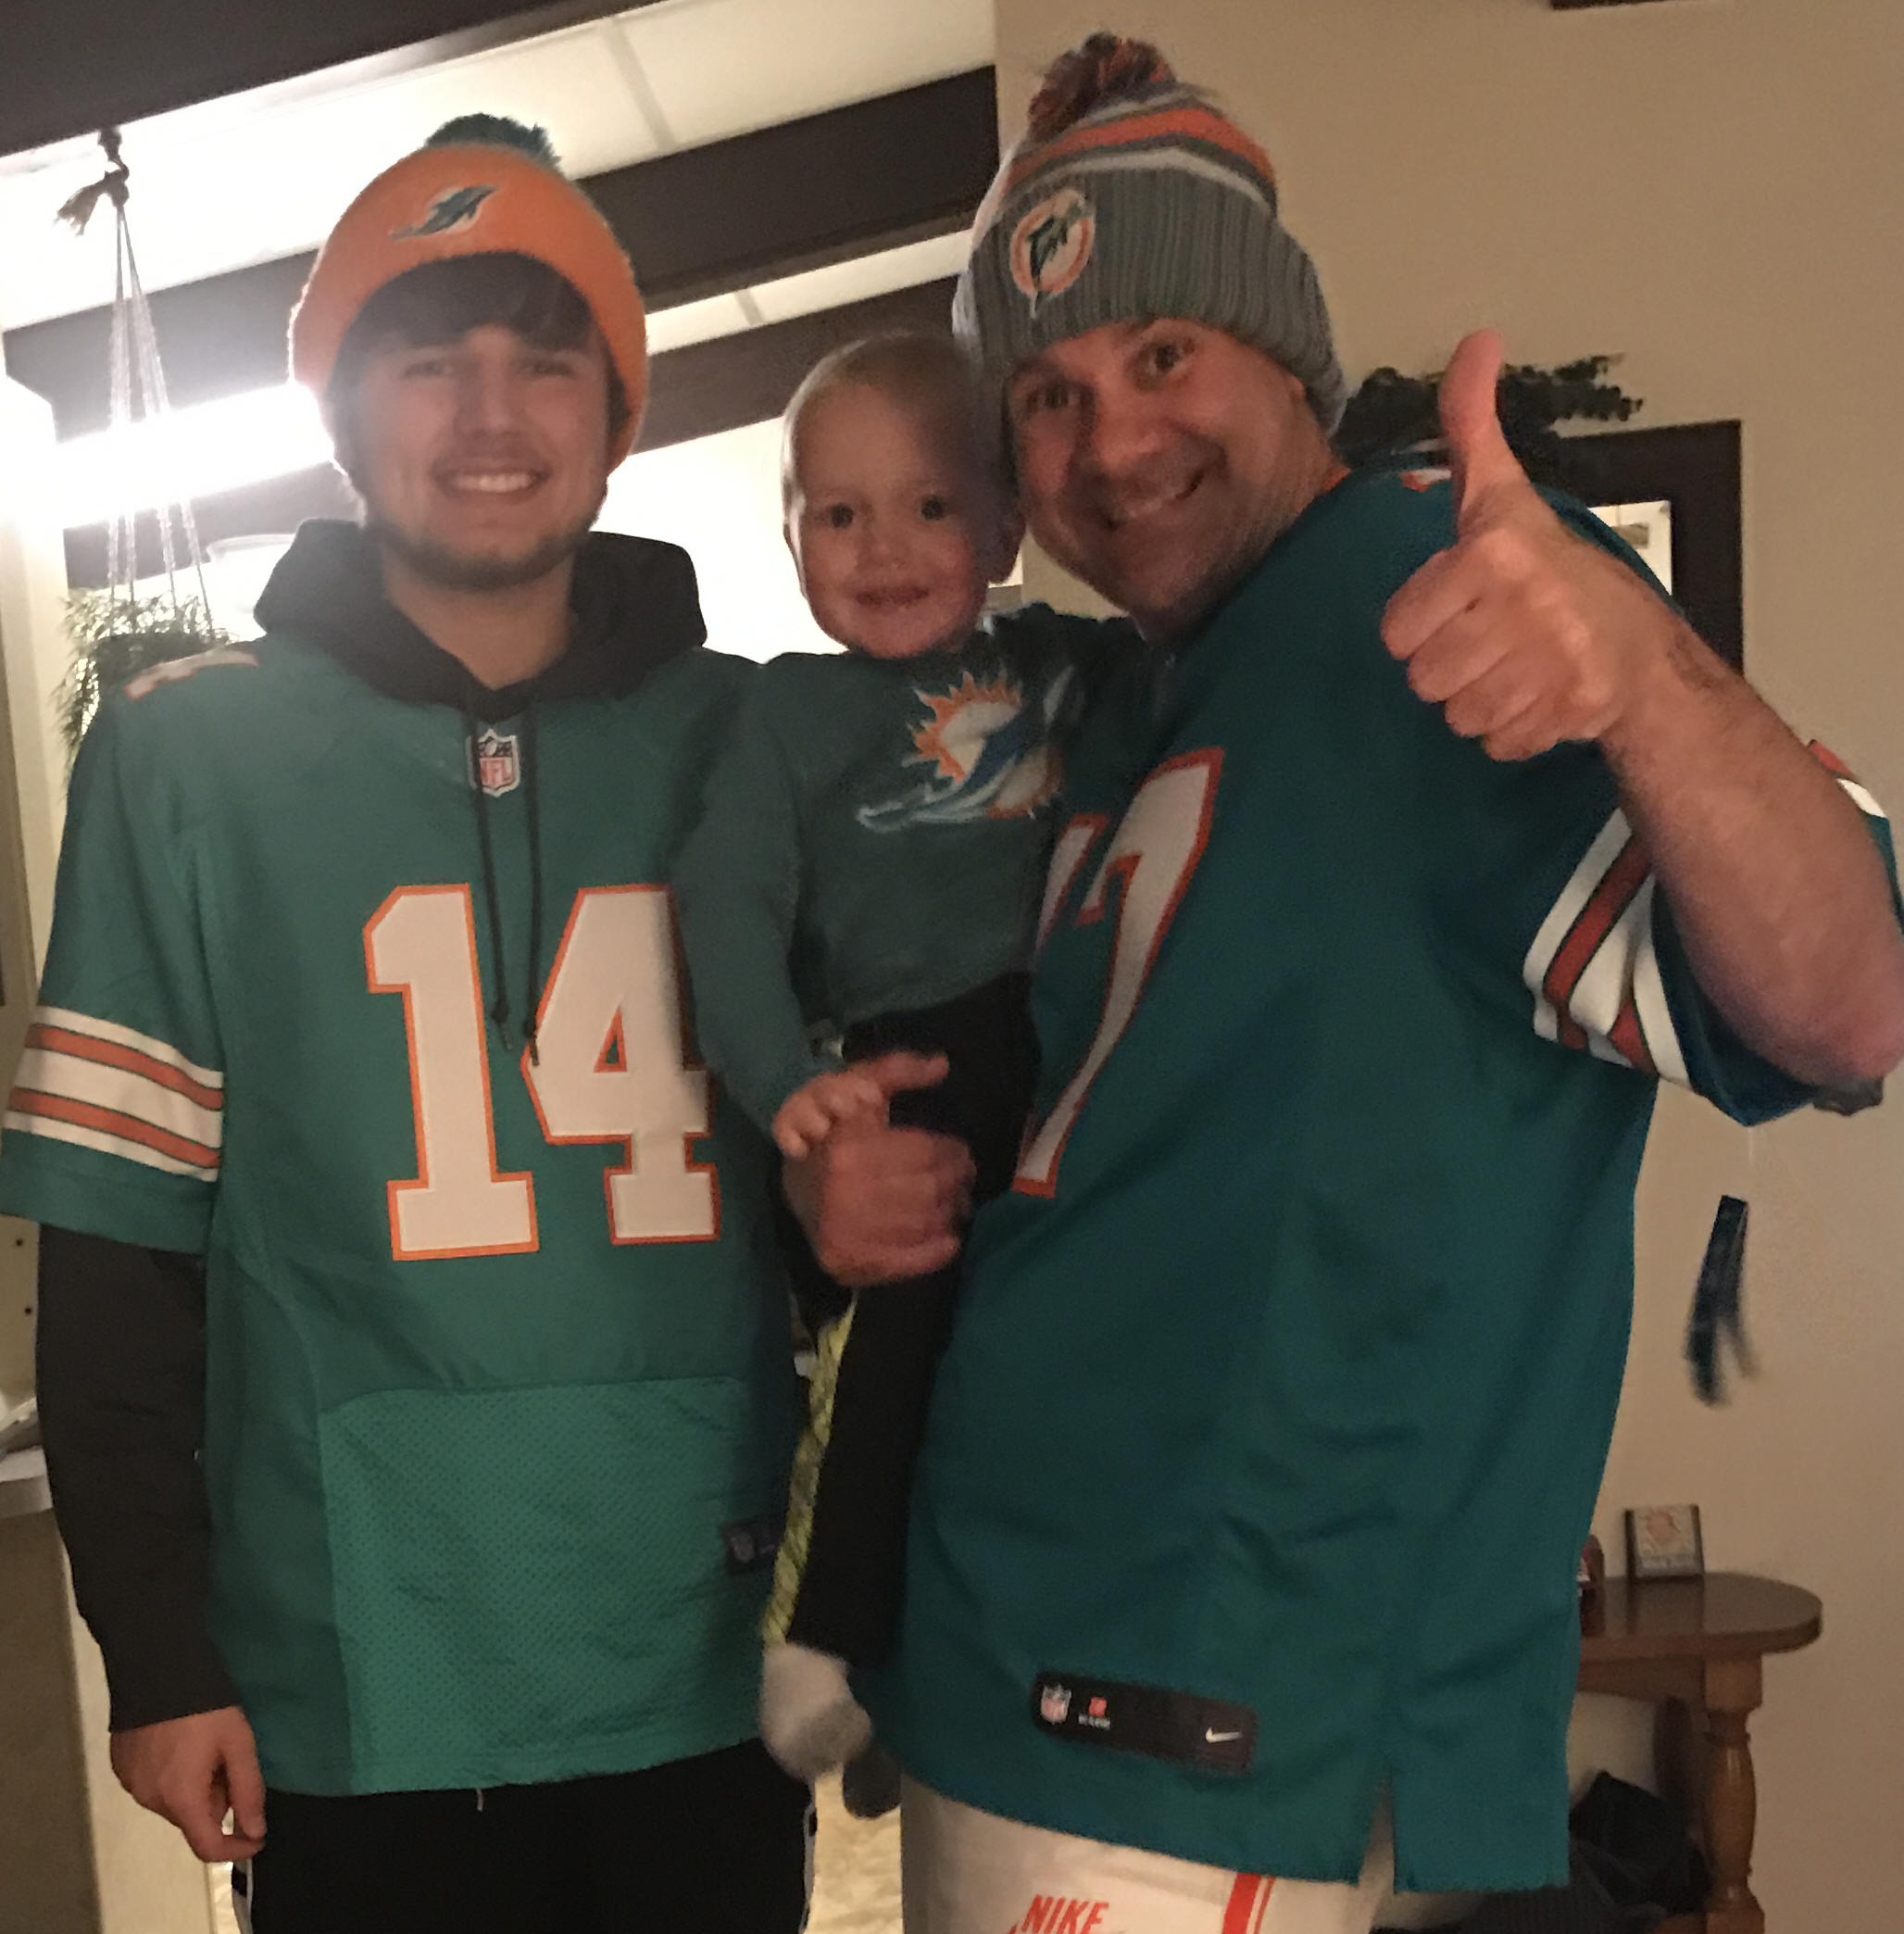 11-27-16 The nephews celebrate another Dolphin victory!